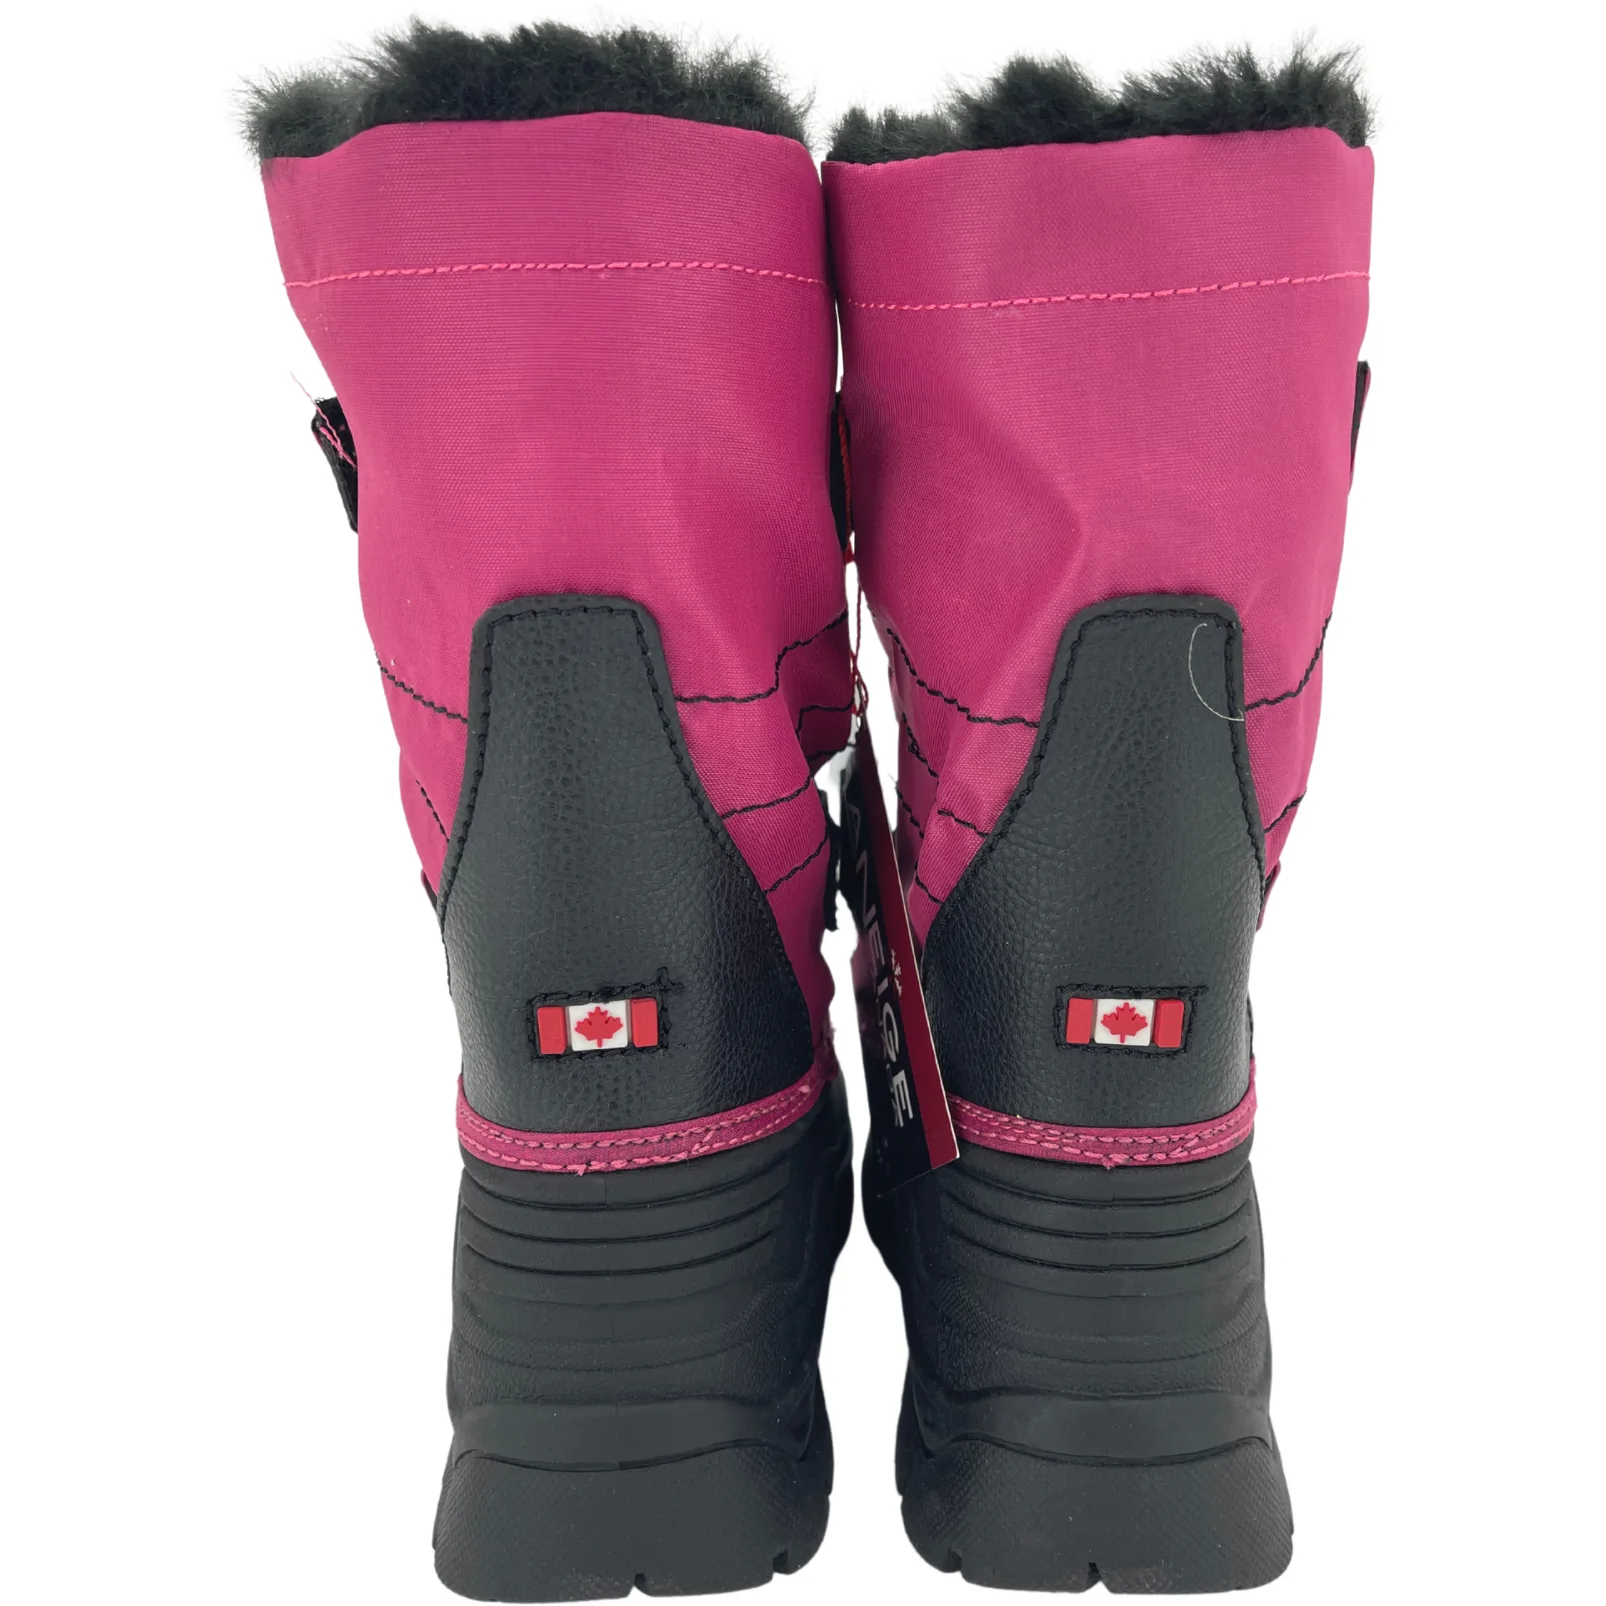 La Neige Kids Winter Boots / Girl's / Waterproof / Removable Liners / Pink / Various Sizes